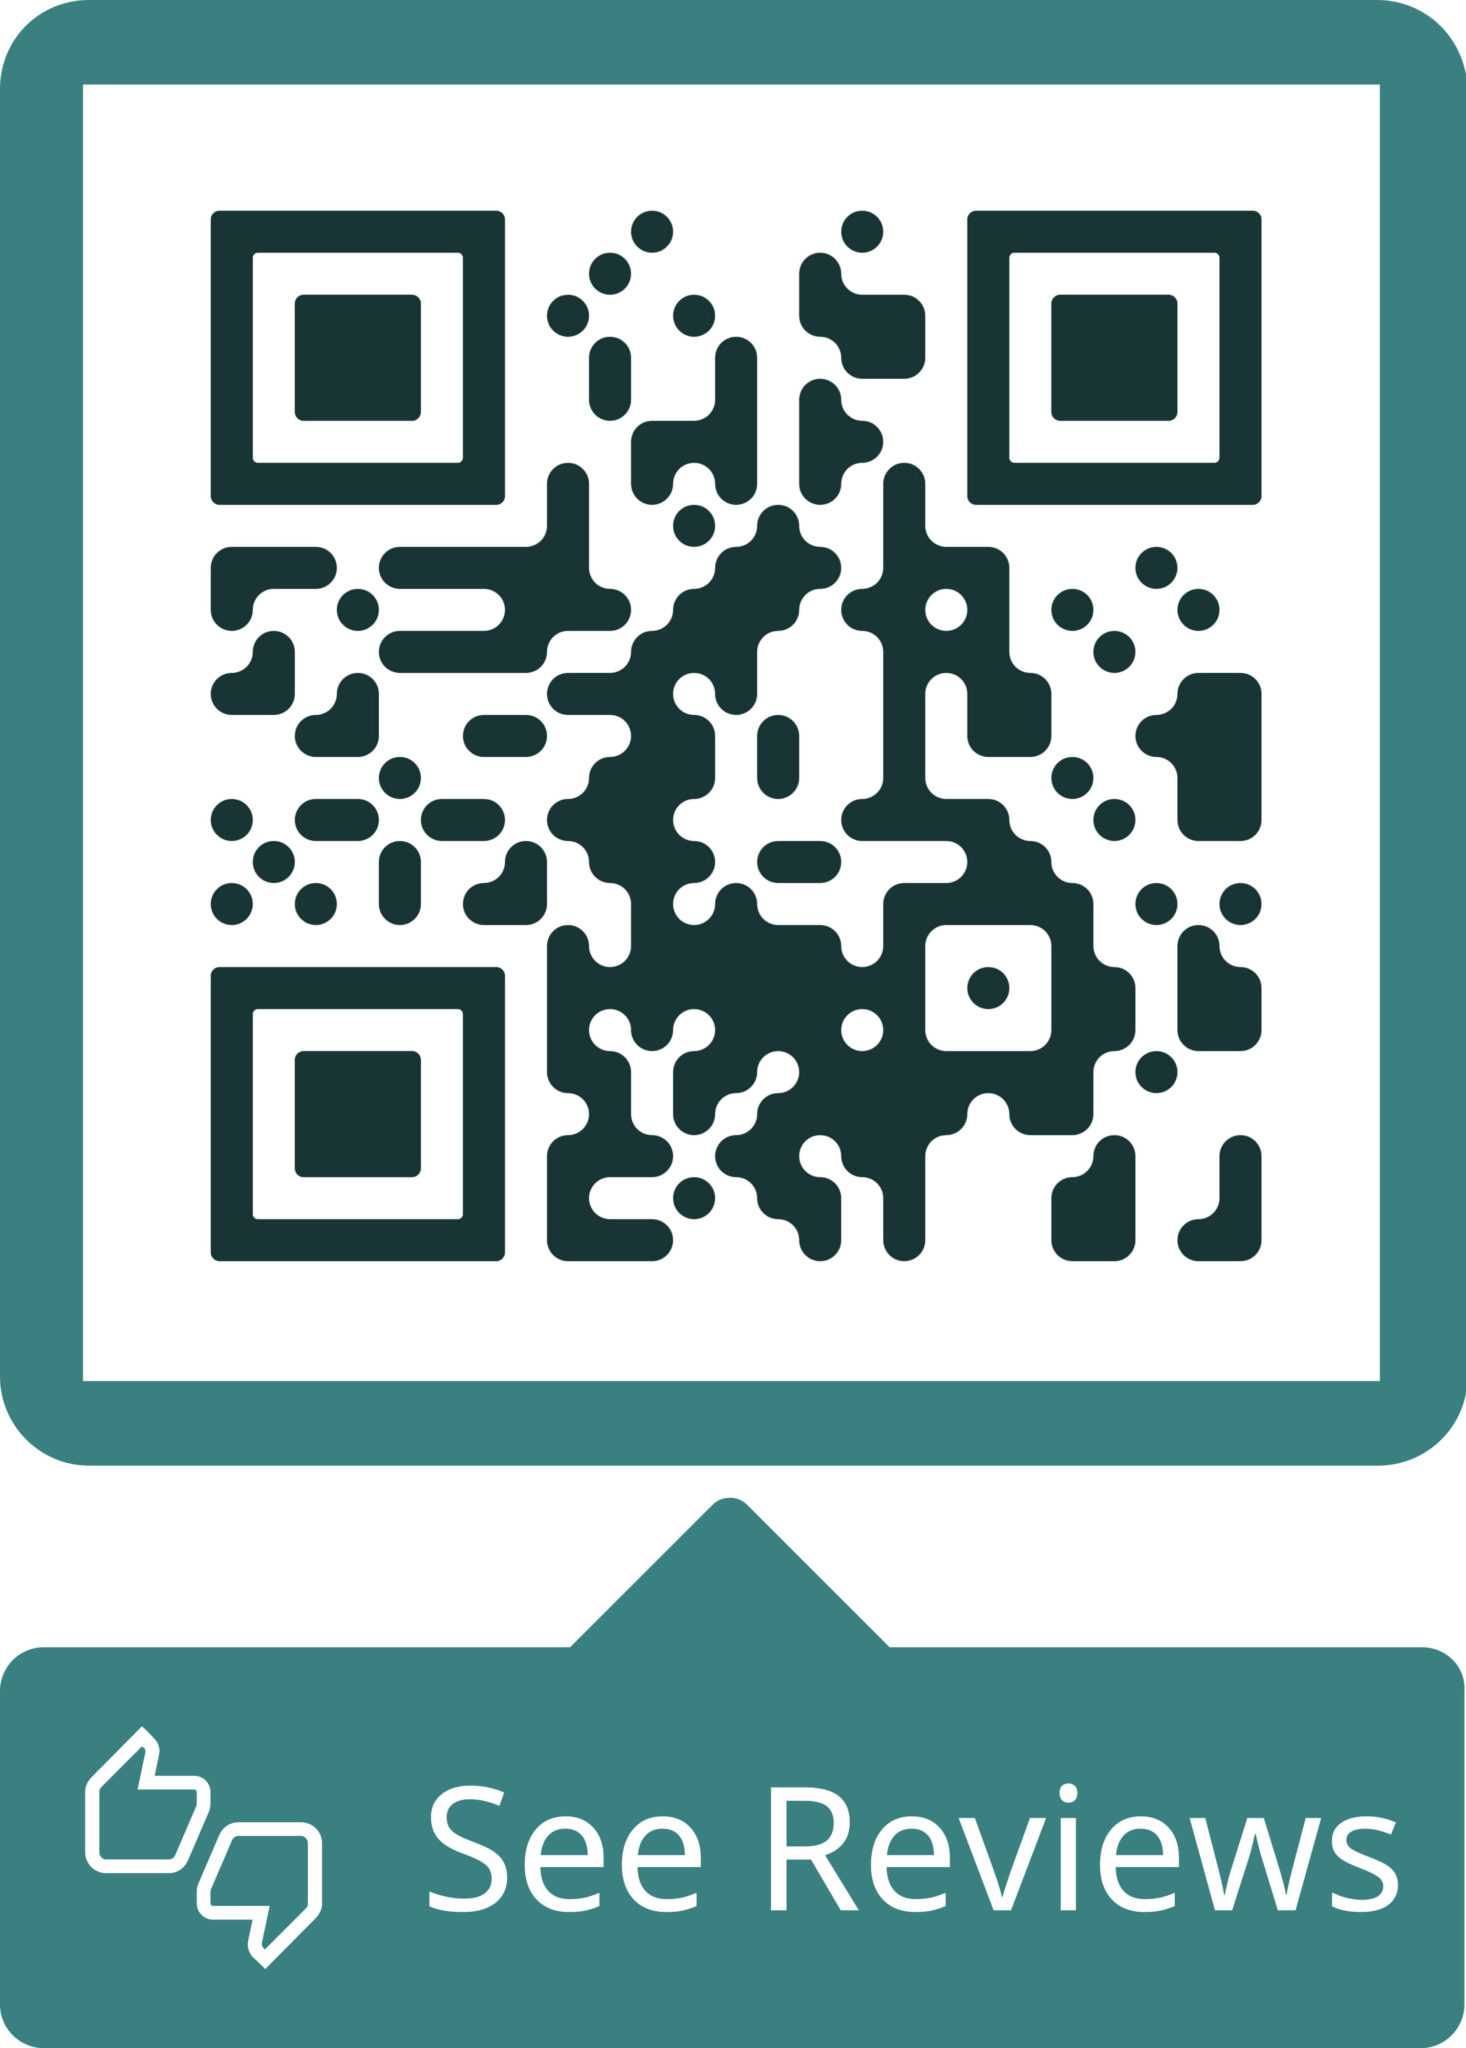 QR code for Roof Crafters Google Reviews